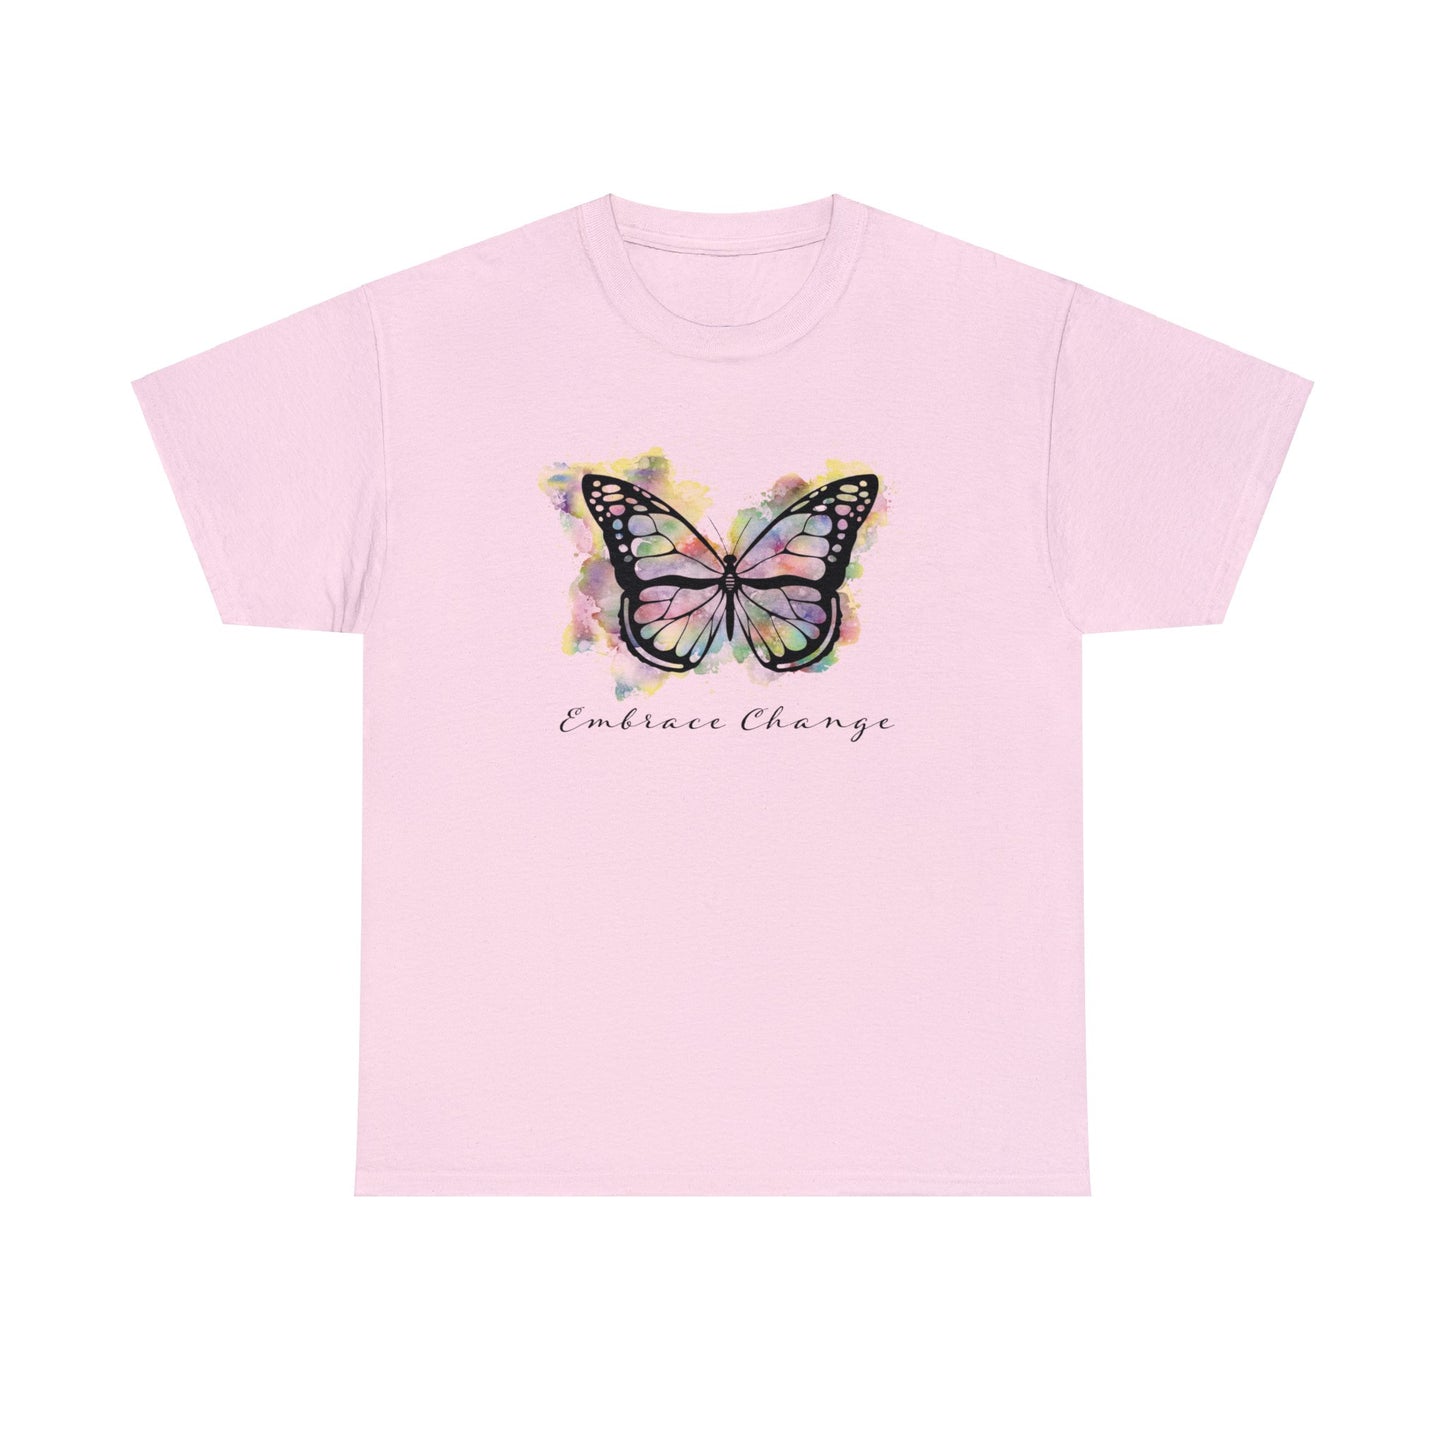 Embrace Change Tee For Butterfly T-Shirt For Watercolor Butterfly Shirt For Spiritual T Shirt For Motivational T Shirt